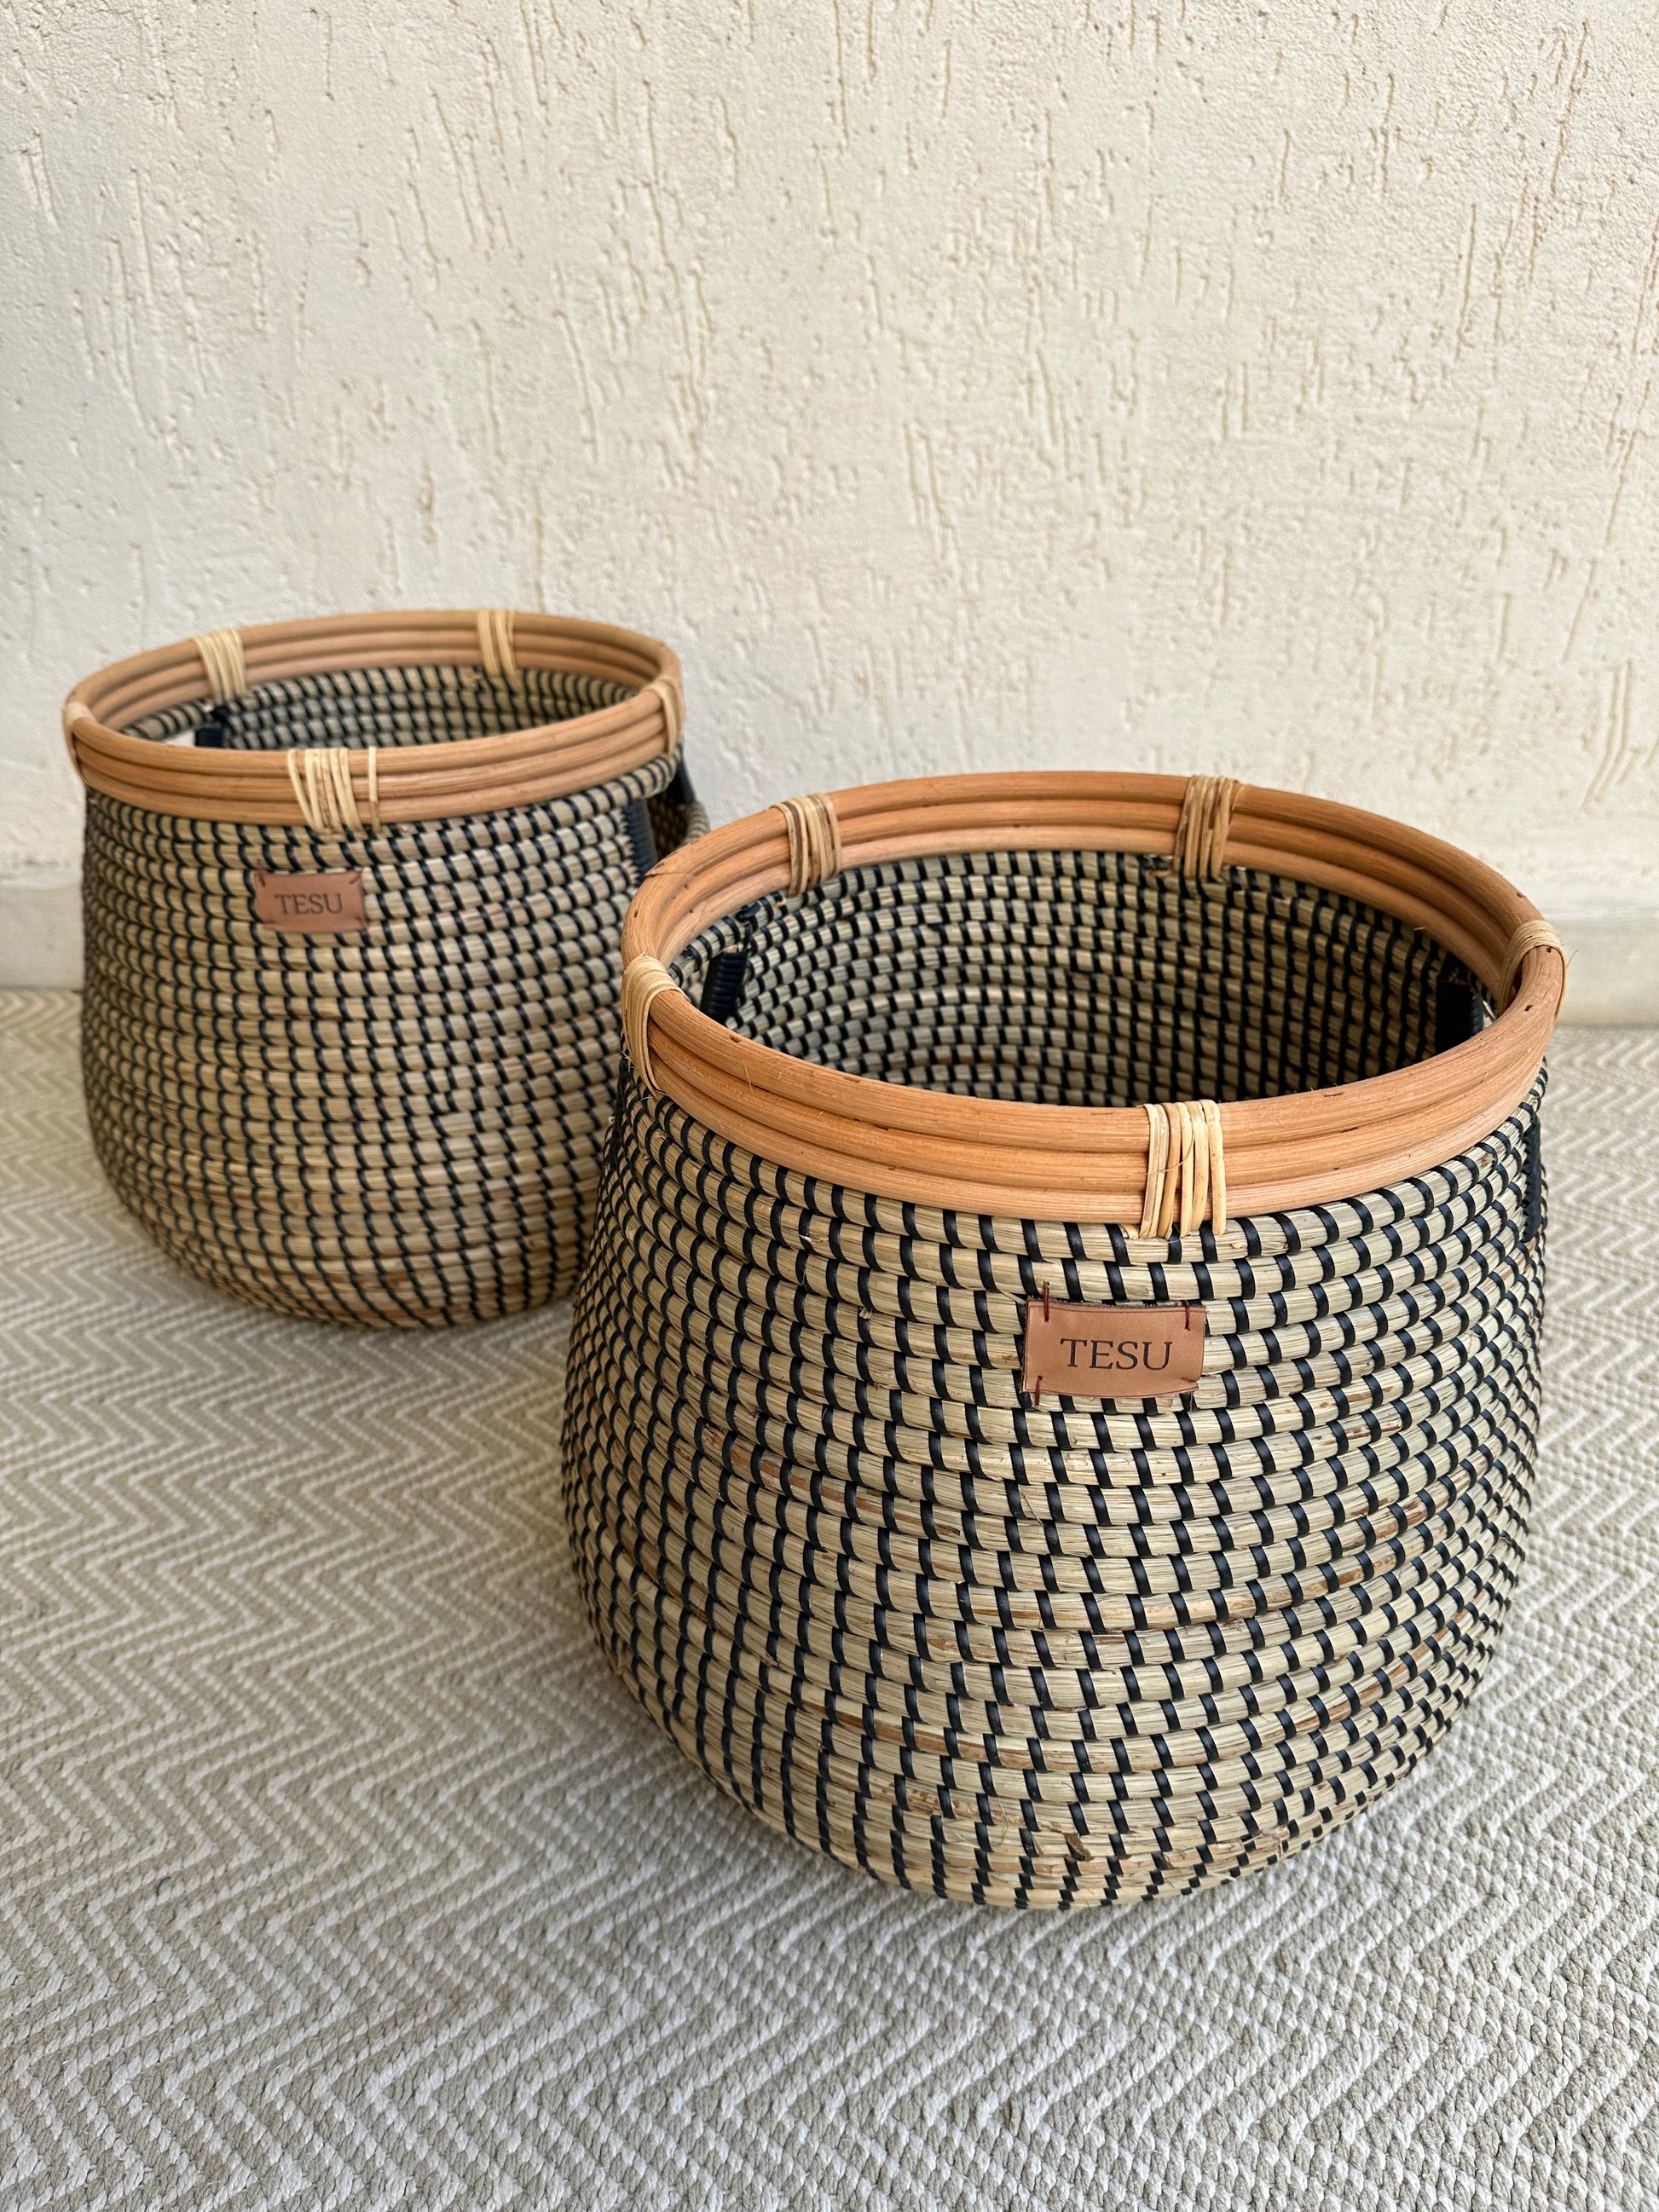 Enhance your Dream Home with our curated selection of premium wall and Home Décor items. Seagrass Plant Holder Cut Out Handles mixed with Rattan , Perfect for decorating your home, living room decor, bedroom interior touches, beautiful cover pots and much more. Its placement is very flexible which is suitable for beautifying your room. Hand-woven by our artisans from sustainable Sea grass these storage baskets are great for storing and have high aesthetic appeal. tesu